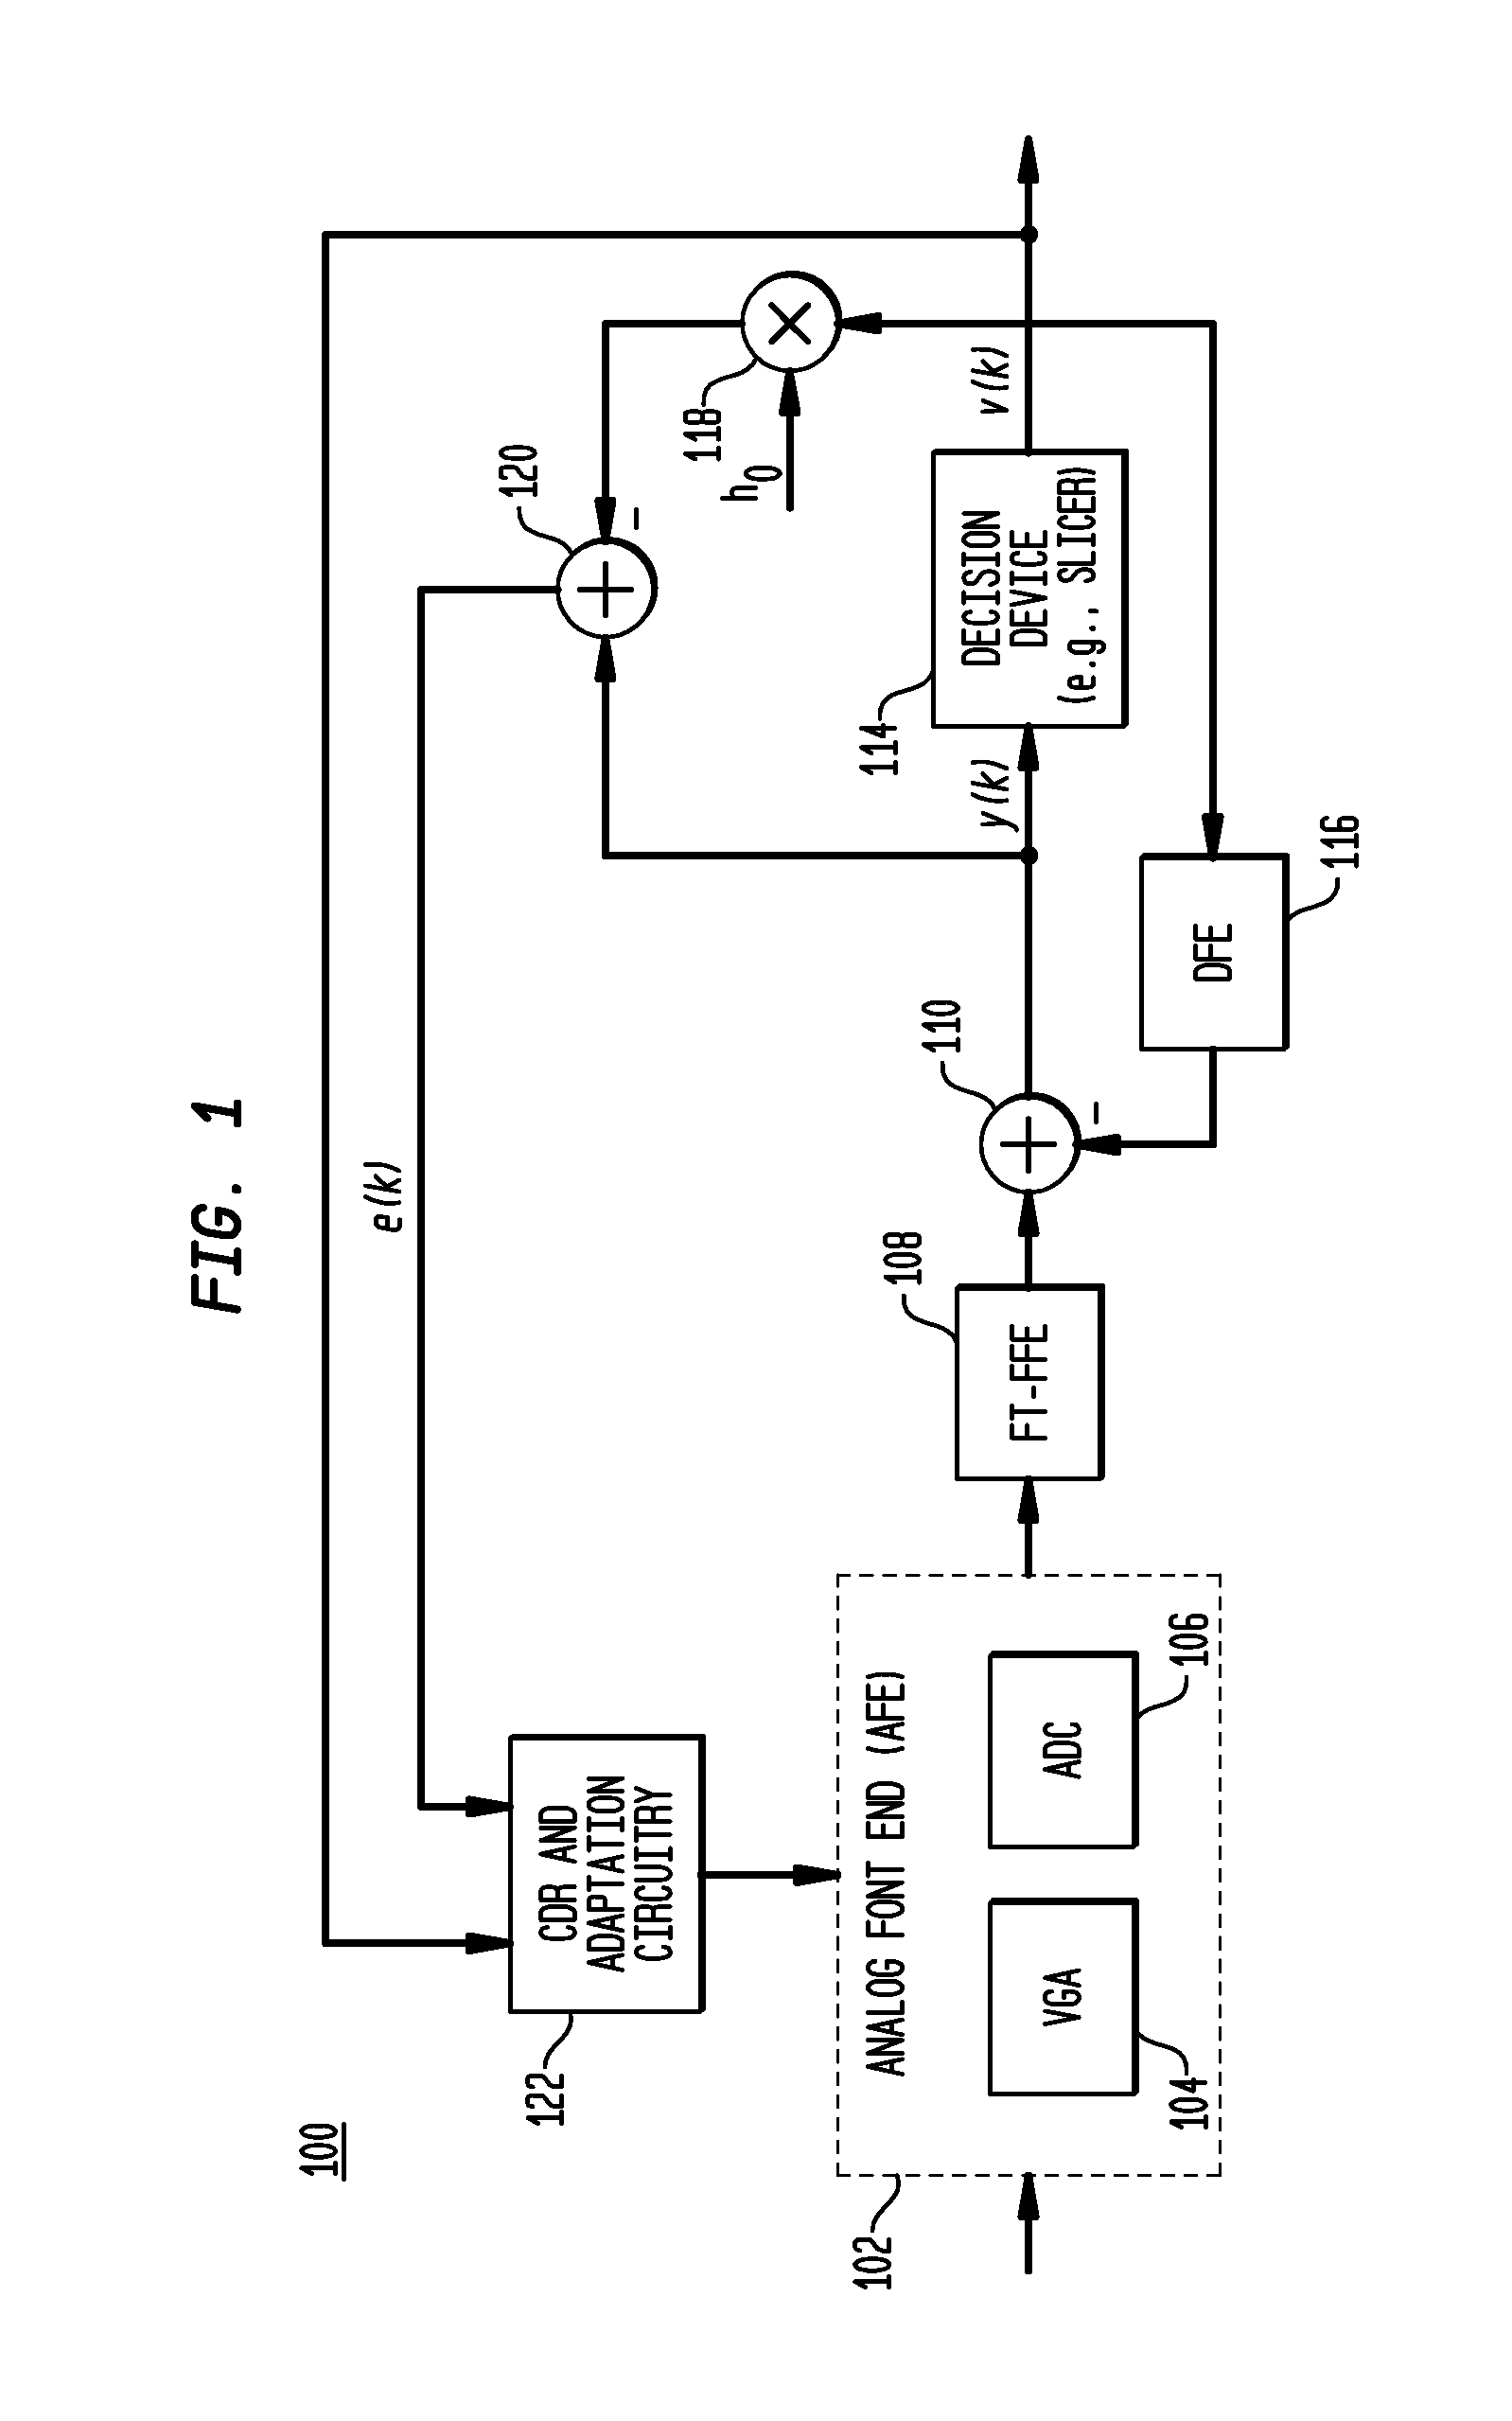 Sparse and reconfigurable floating tap feed forward equalization